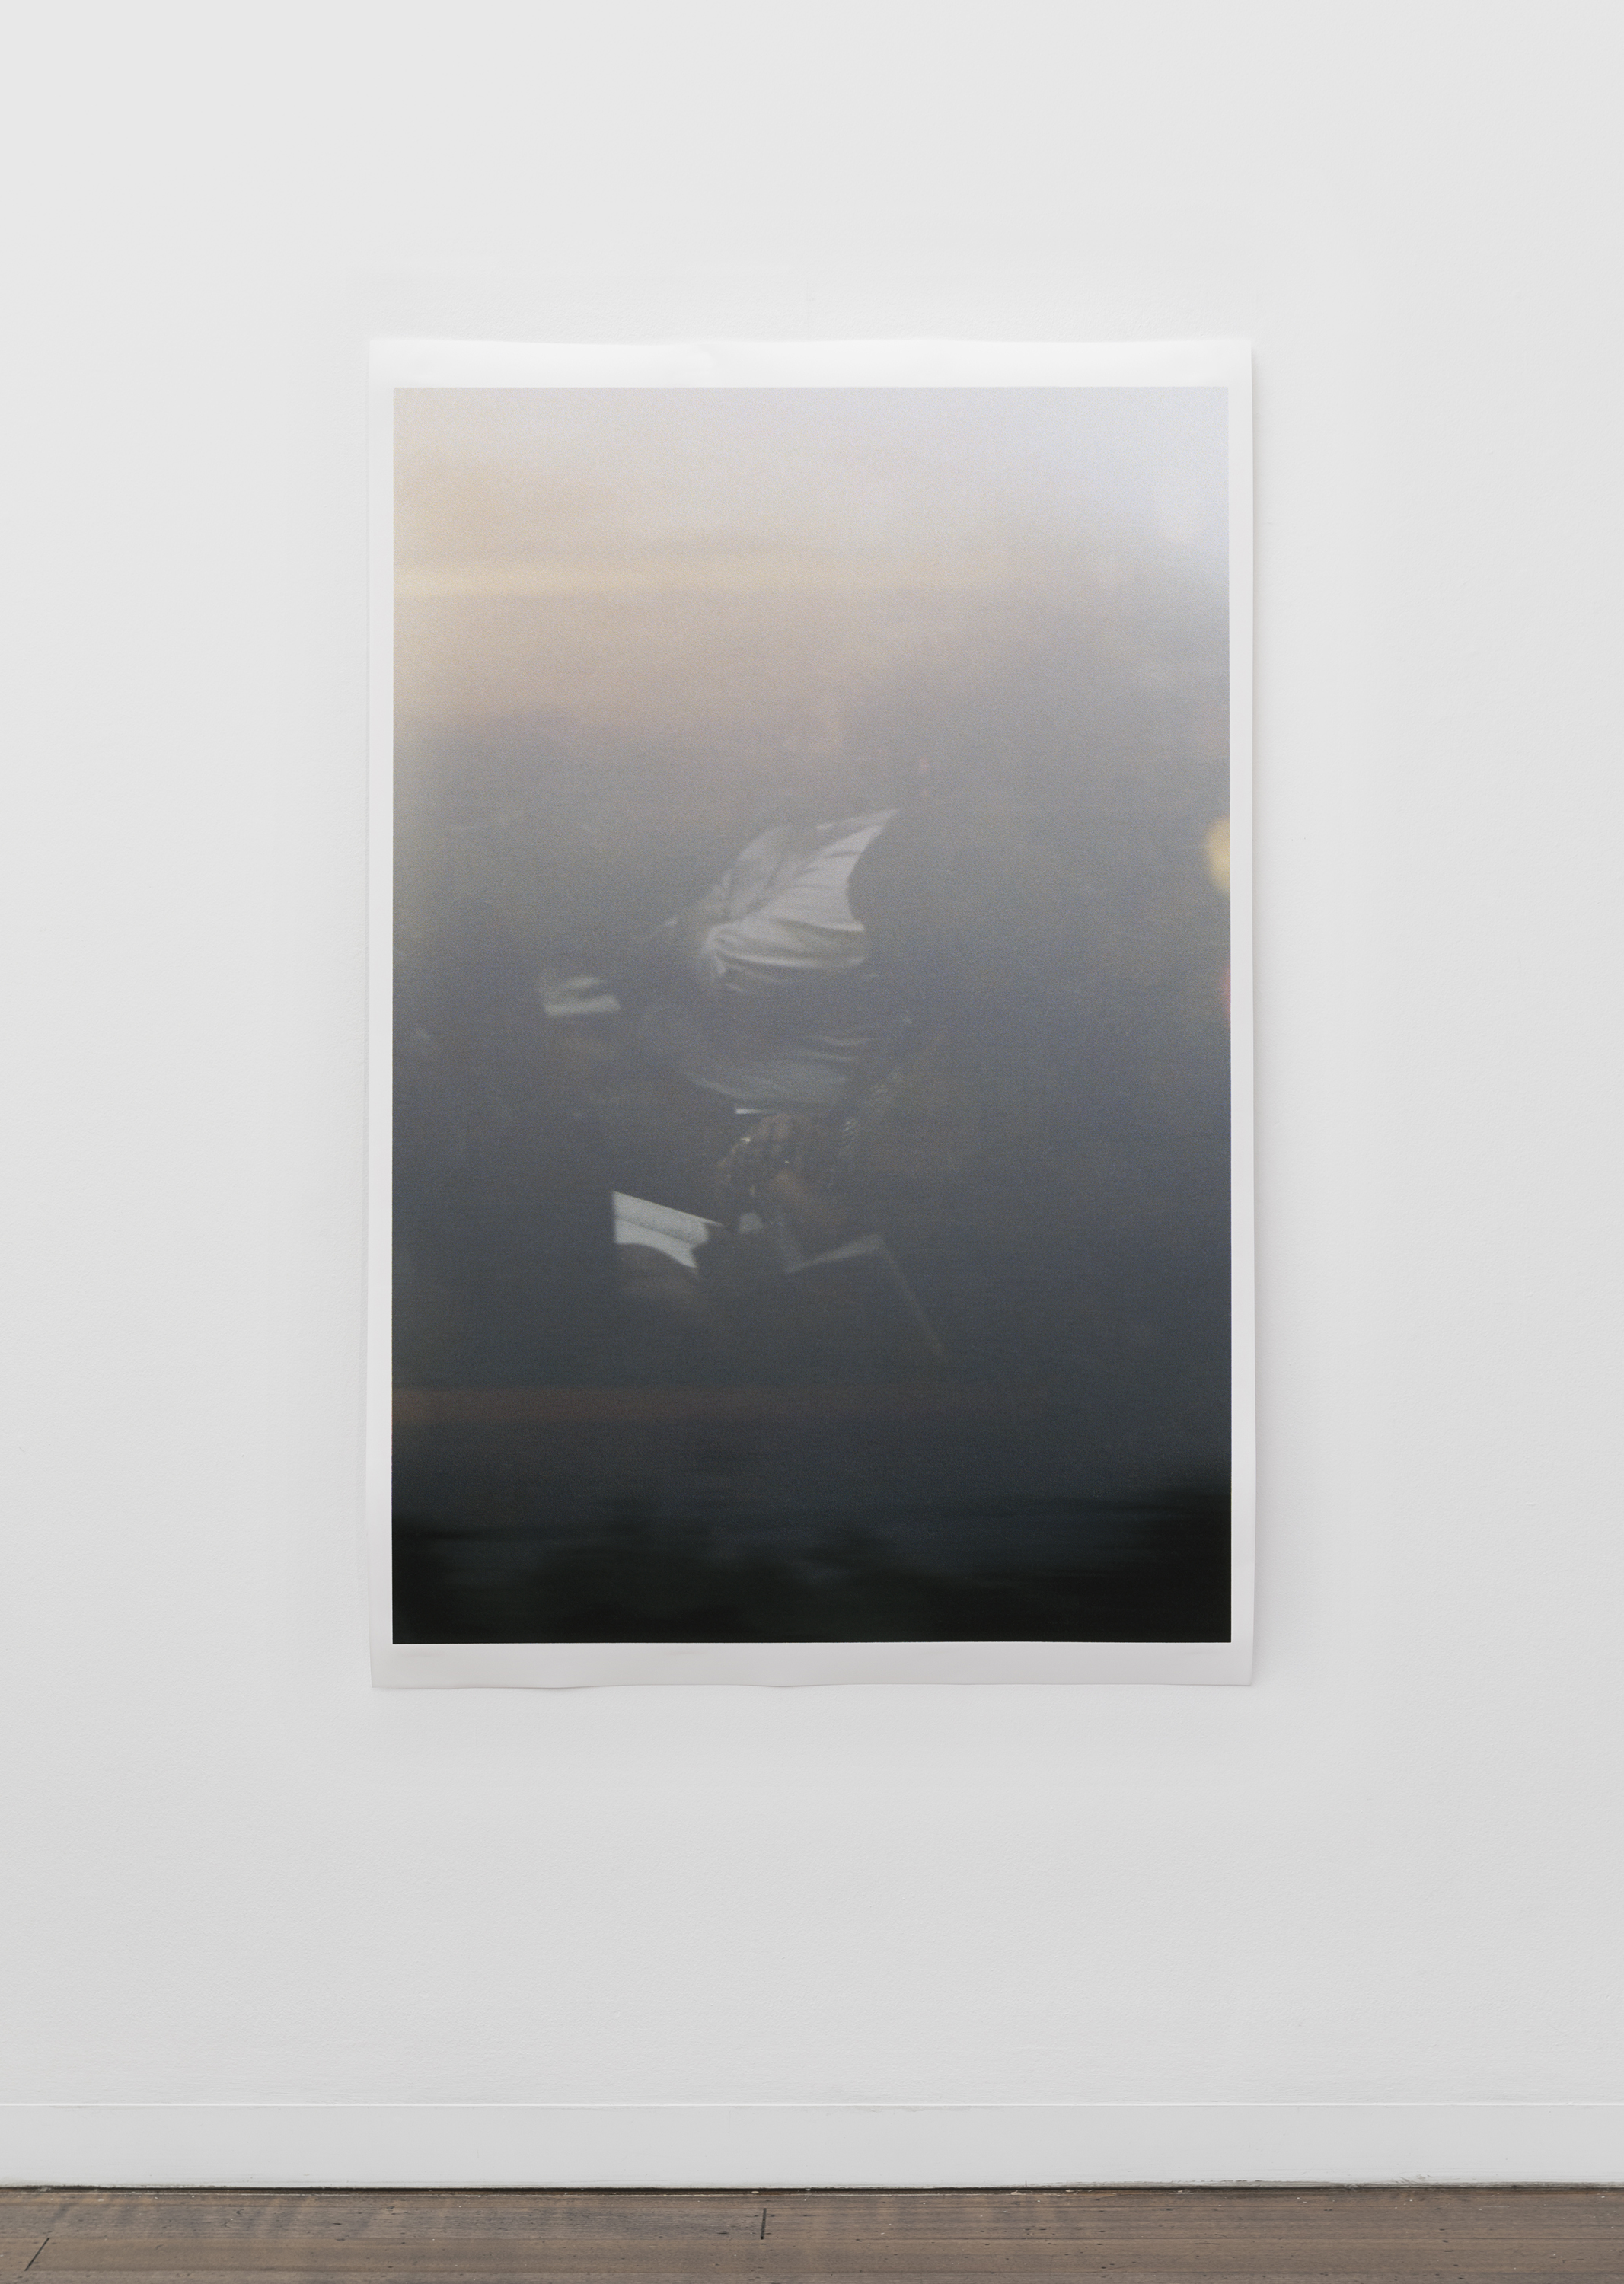   Untitled (figure, glass, landscape) , pigment print on paper, sheet: 168 × 110 cm (66 1/8 × 43 1/4 in), framed: 178.9 × 120.2 cm (70 1/2 × 47 3/8 in), 2019  Installation view of “the sacredness of something” at Arc One Gallery, Melbourne (2019) 